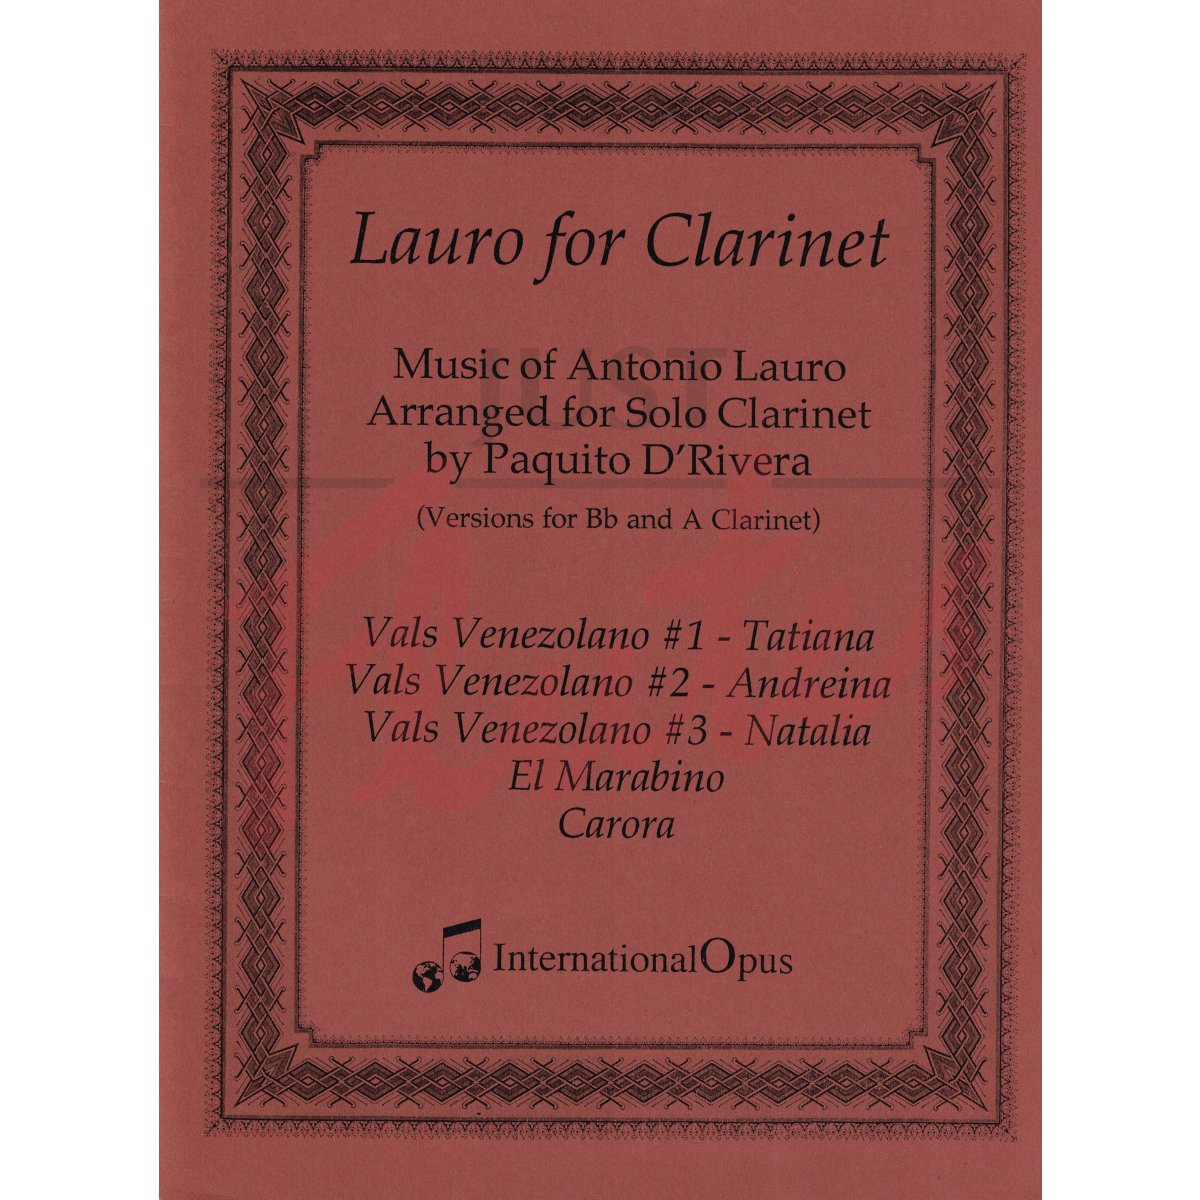 Lauro for Clarinet